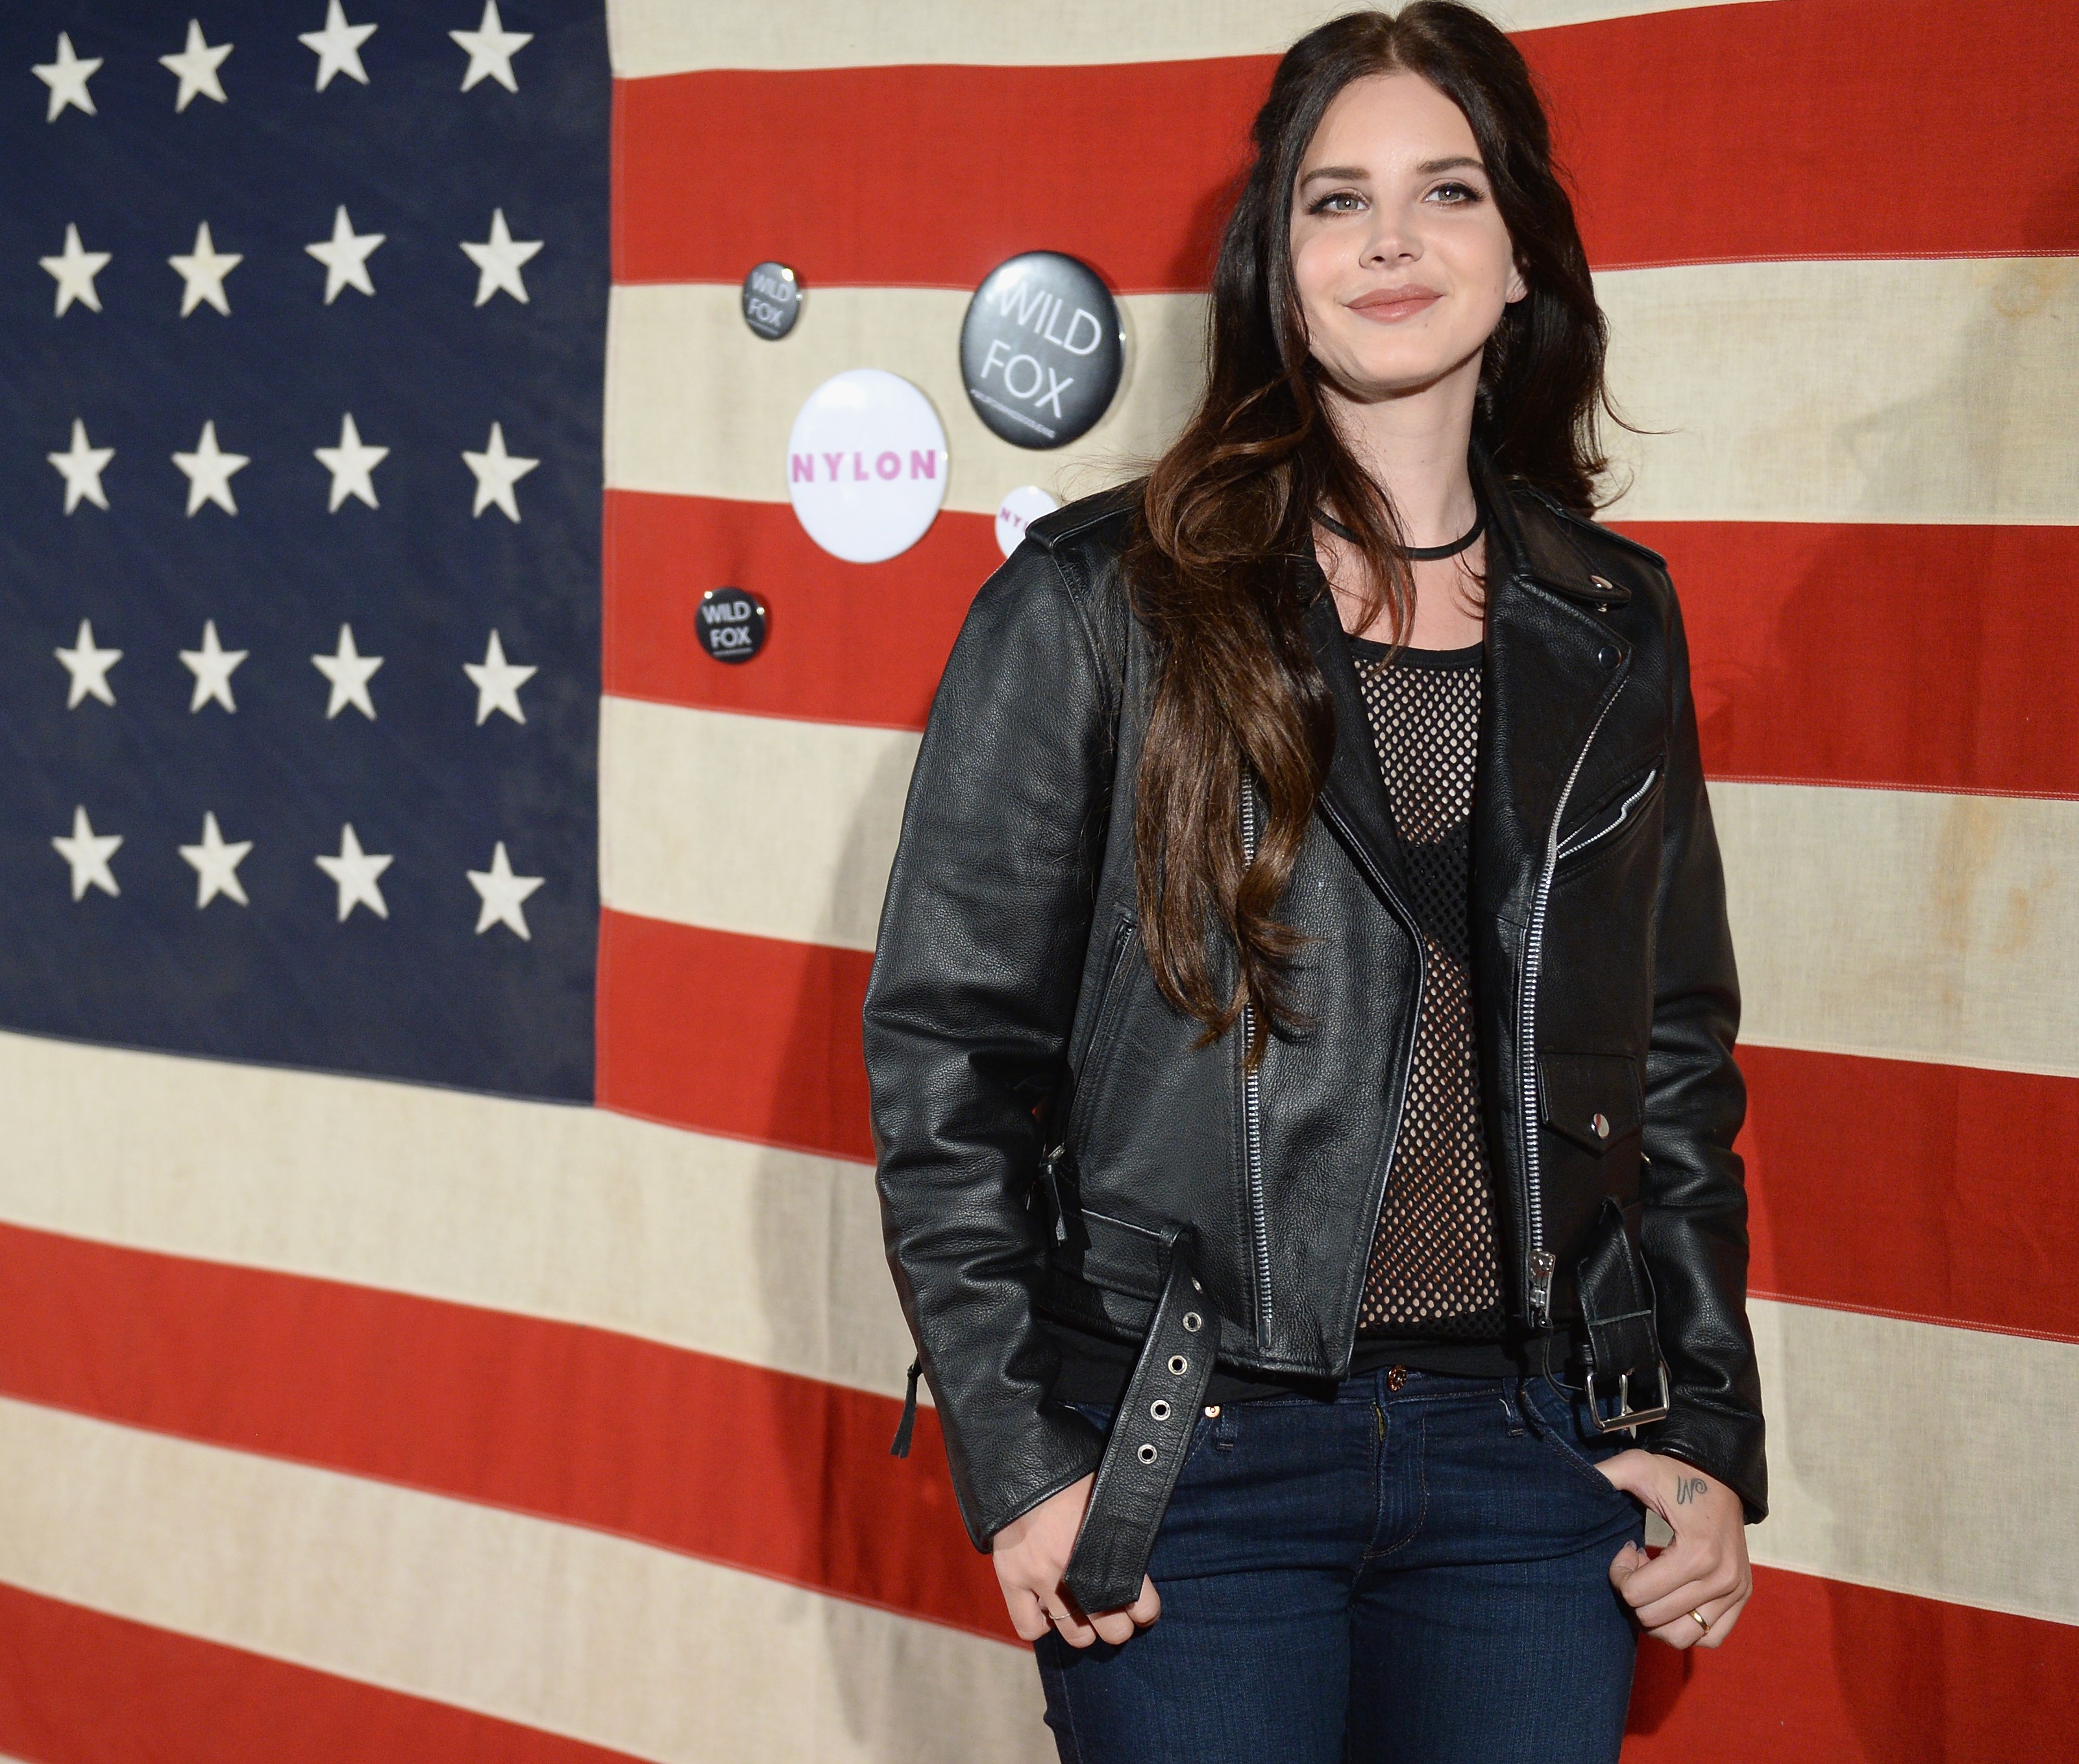 Lana Del Rey with a flag during the "Ride" era